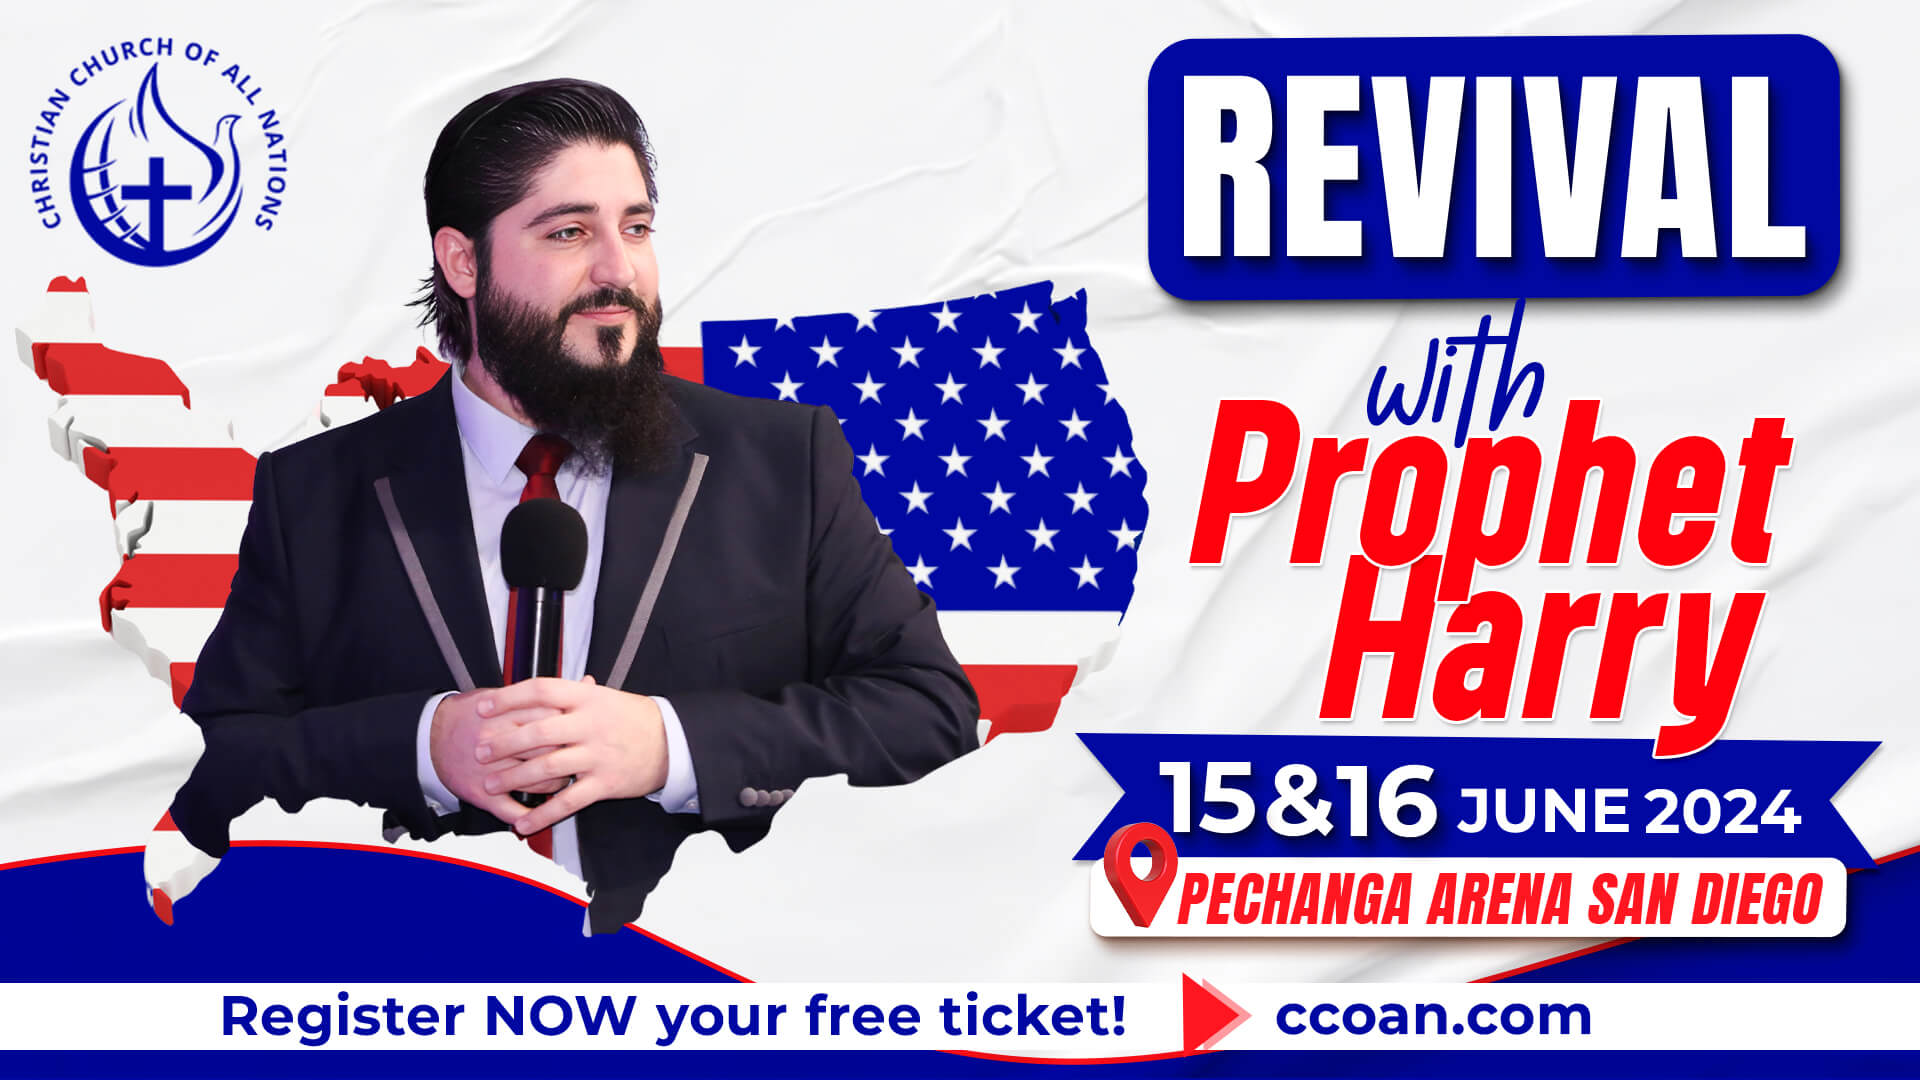 SAN DIEGO — USA REVIVAL WITH PROPHET HARRY!